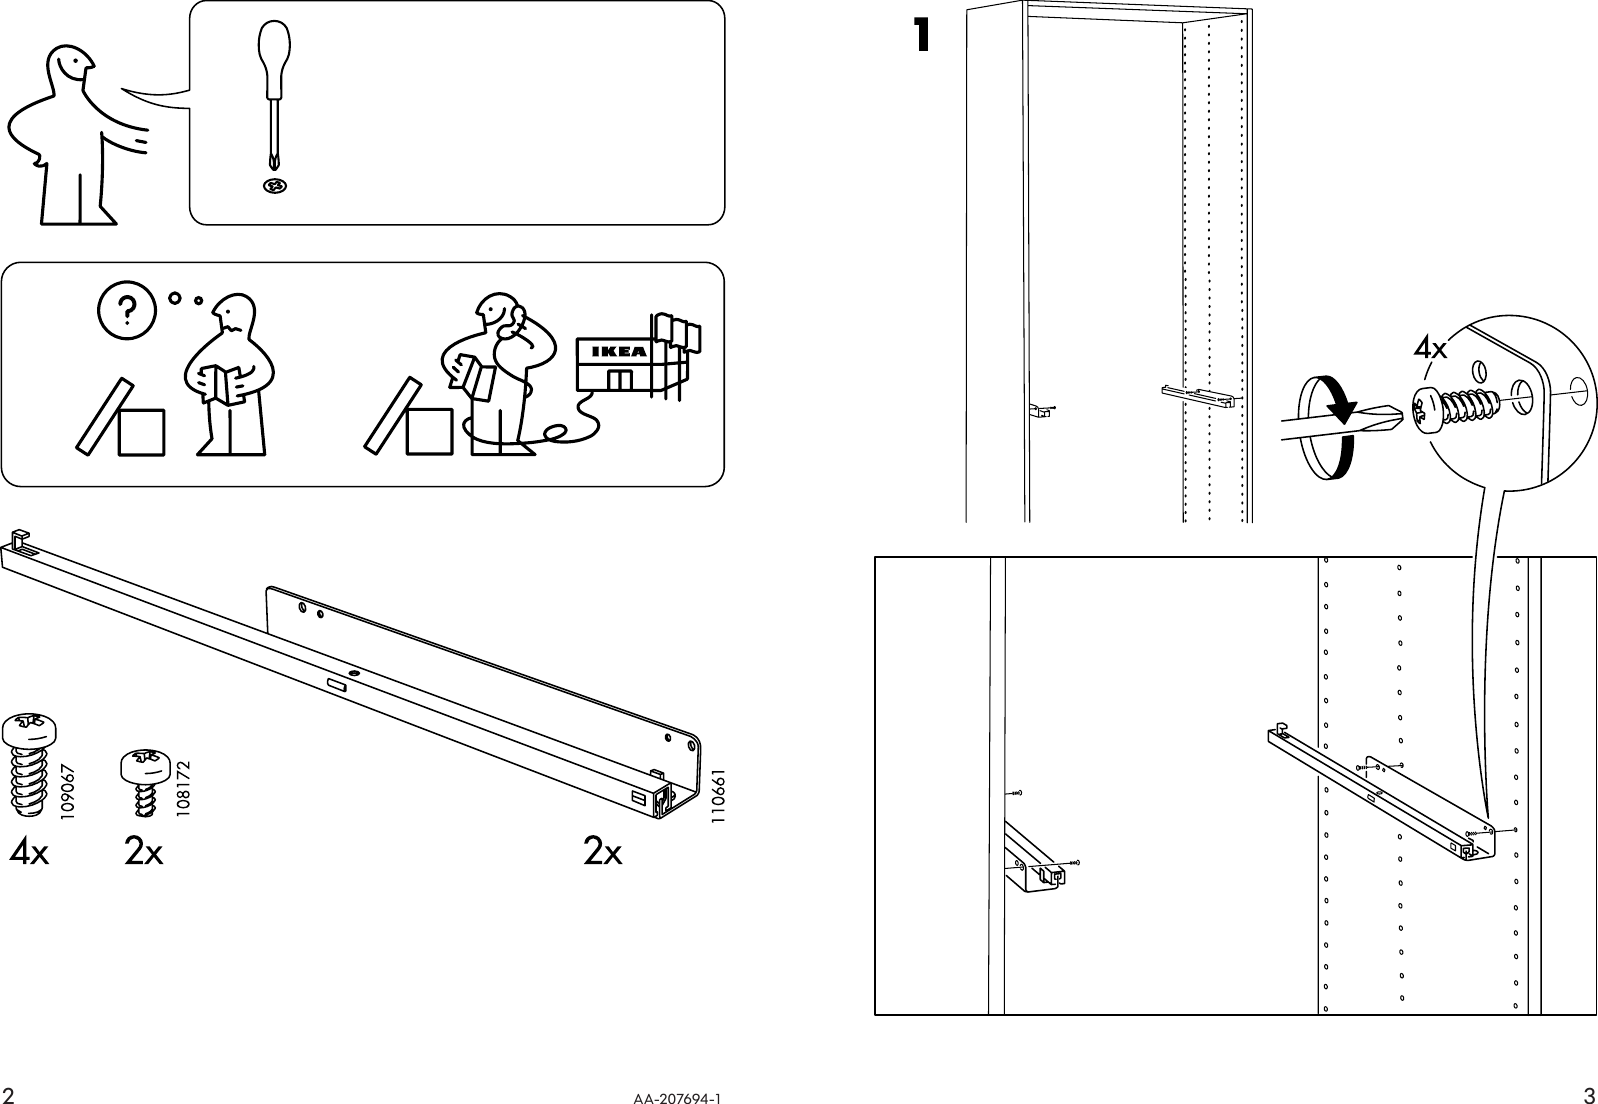 Page 2 of 2 - Ikea Ikea-Komplement-Pants-Hanger-39X23-Assembly-Instruction